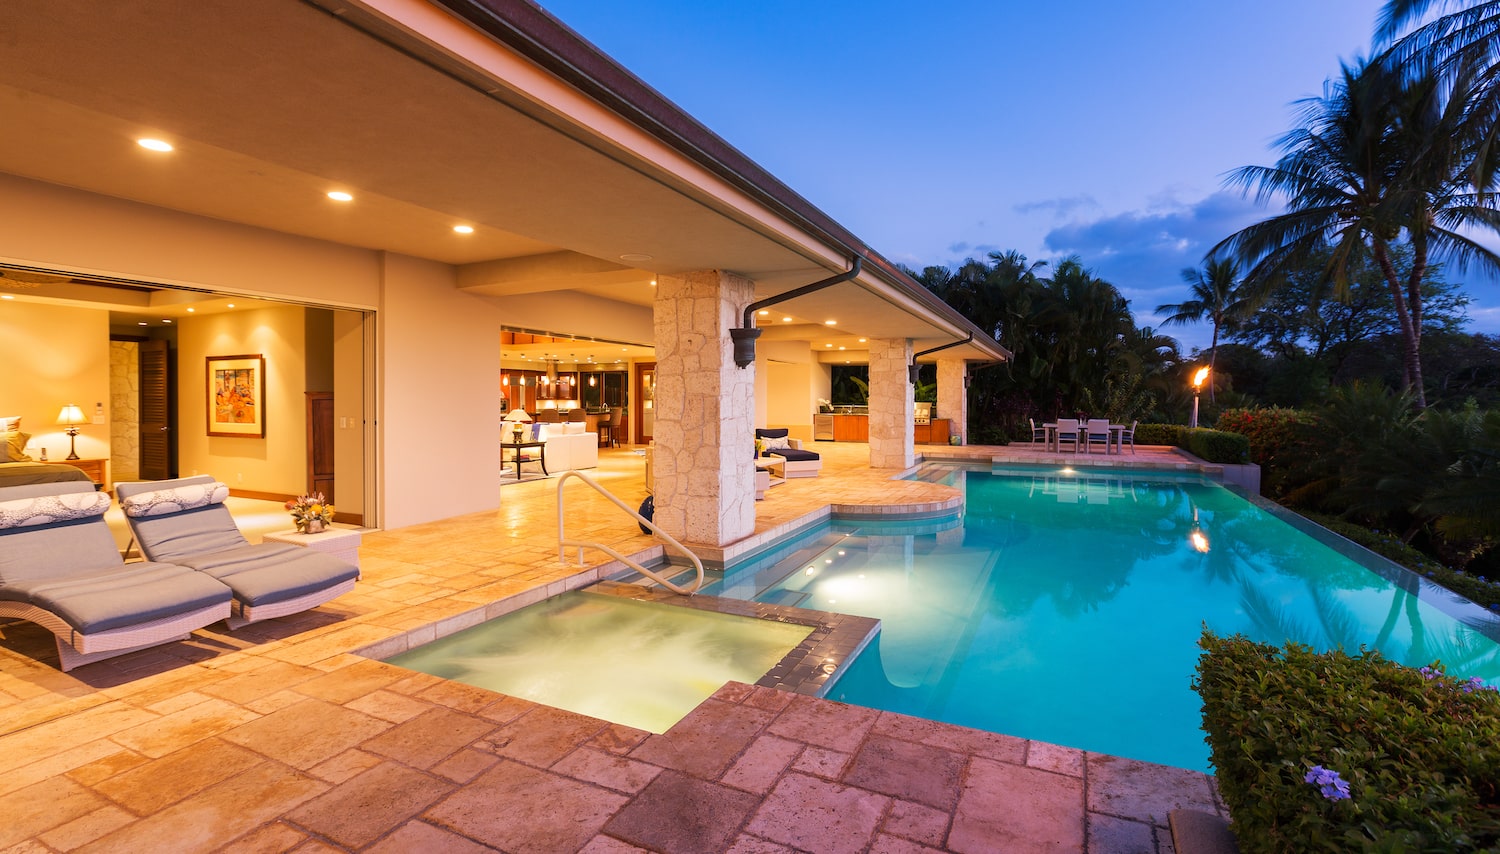 How to Choose the Right Pool Contractor for Your Project